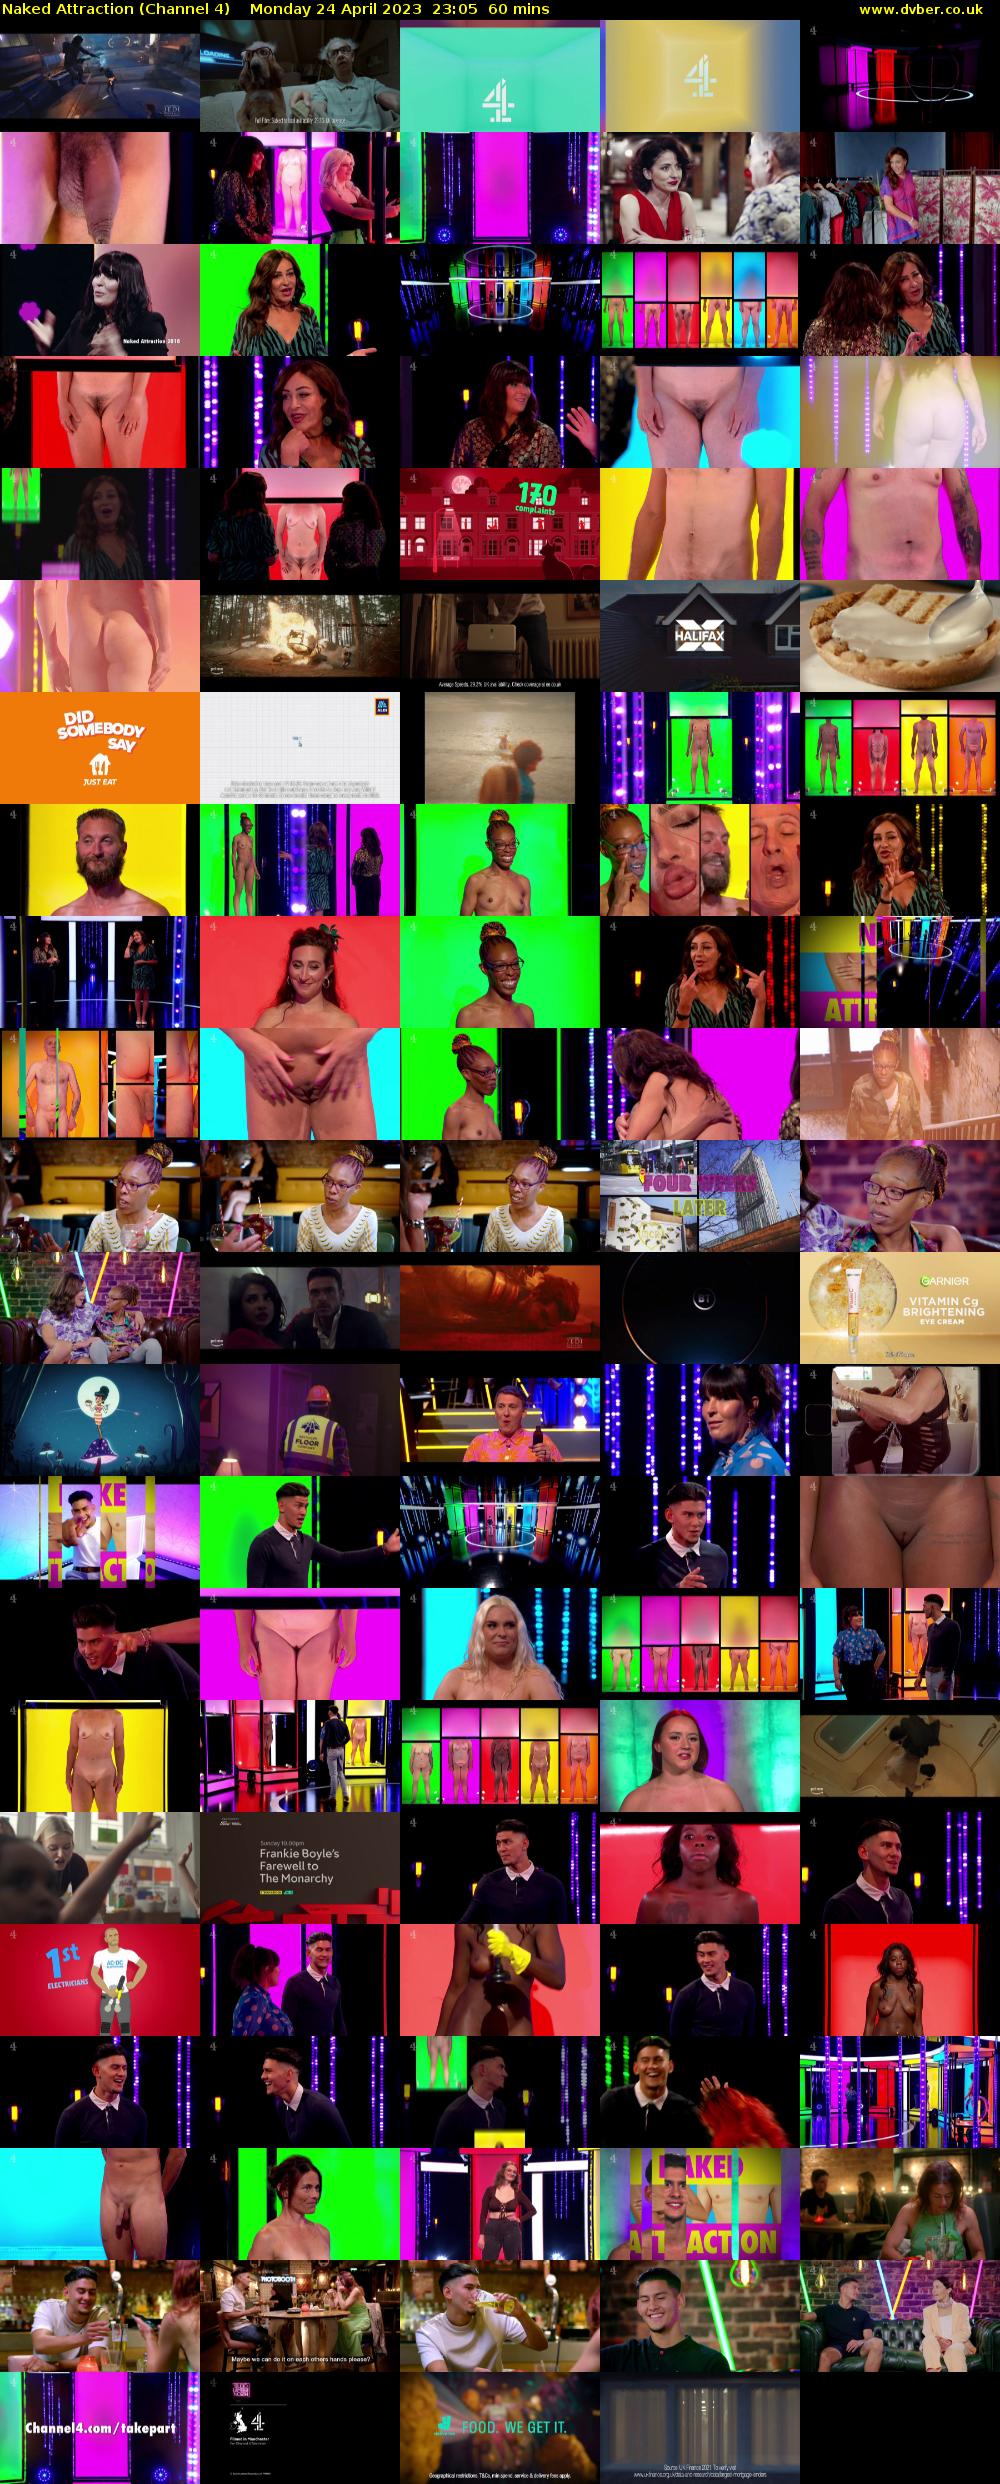 Naked Attraction (Channel 4) Monday 24 April 2023 23:05 - 00:05